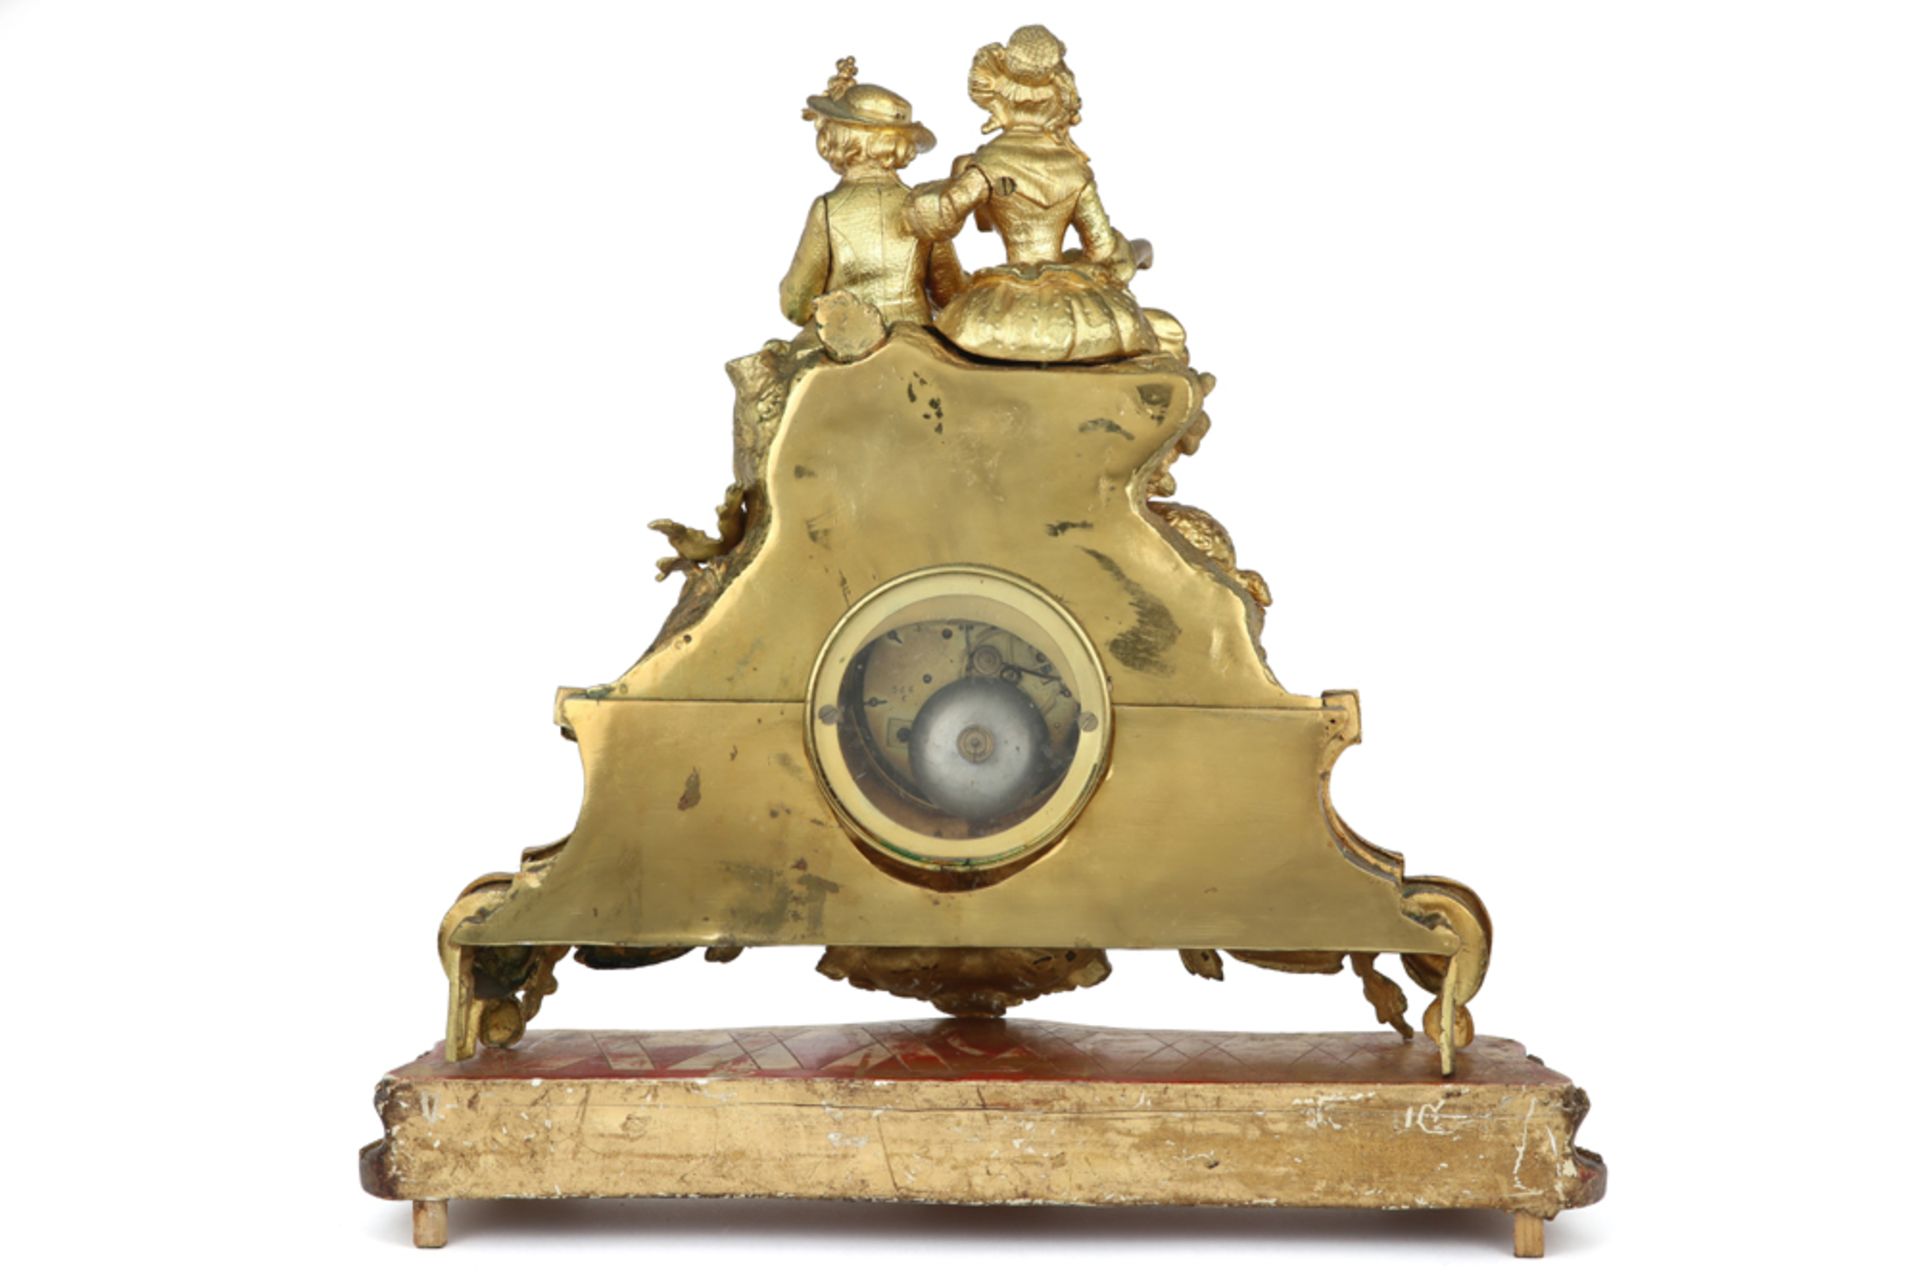 19th Cent. clock with its case in gilded metal and with a "Japy frêres 1855" signed work || - Image 2 of 3